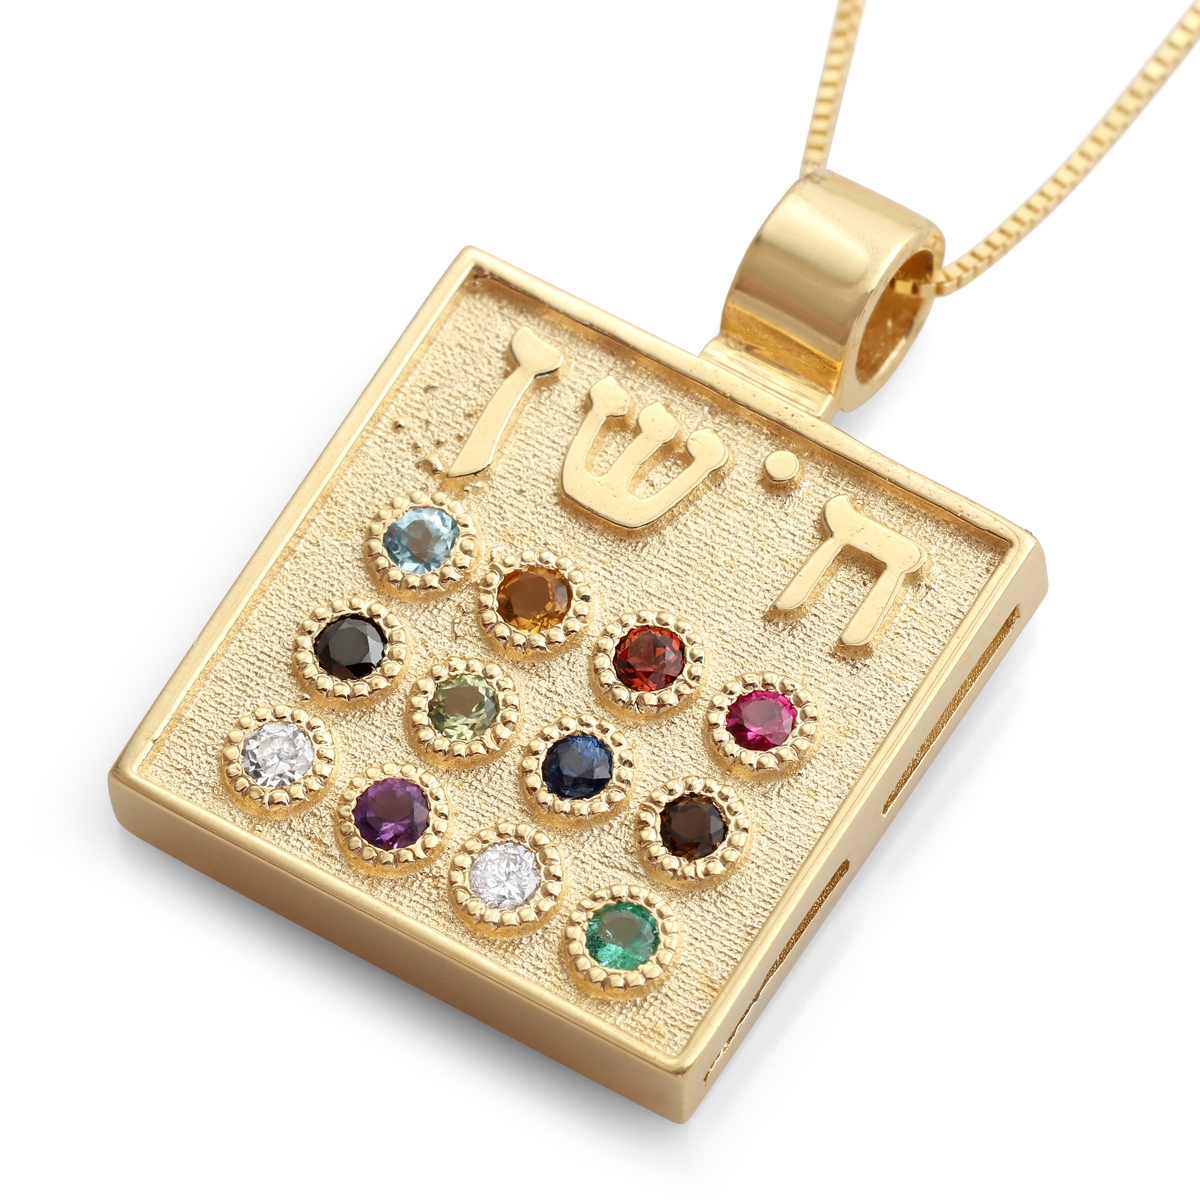 The Best Bible-Inspired Jewelry From Israel